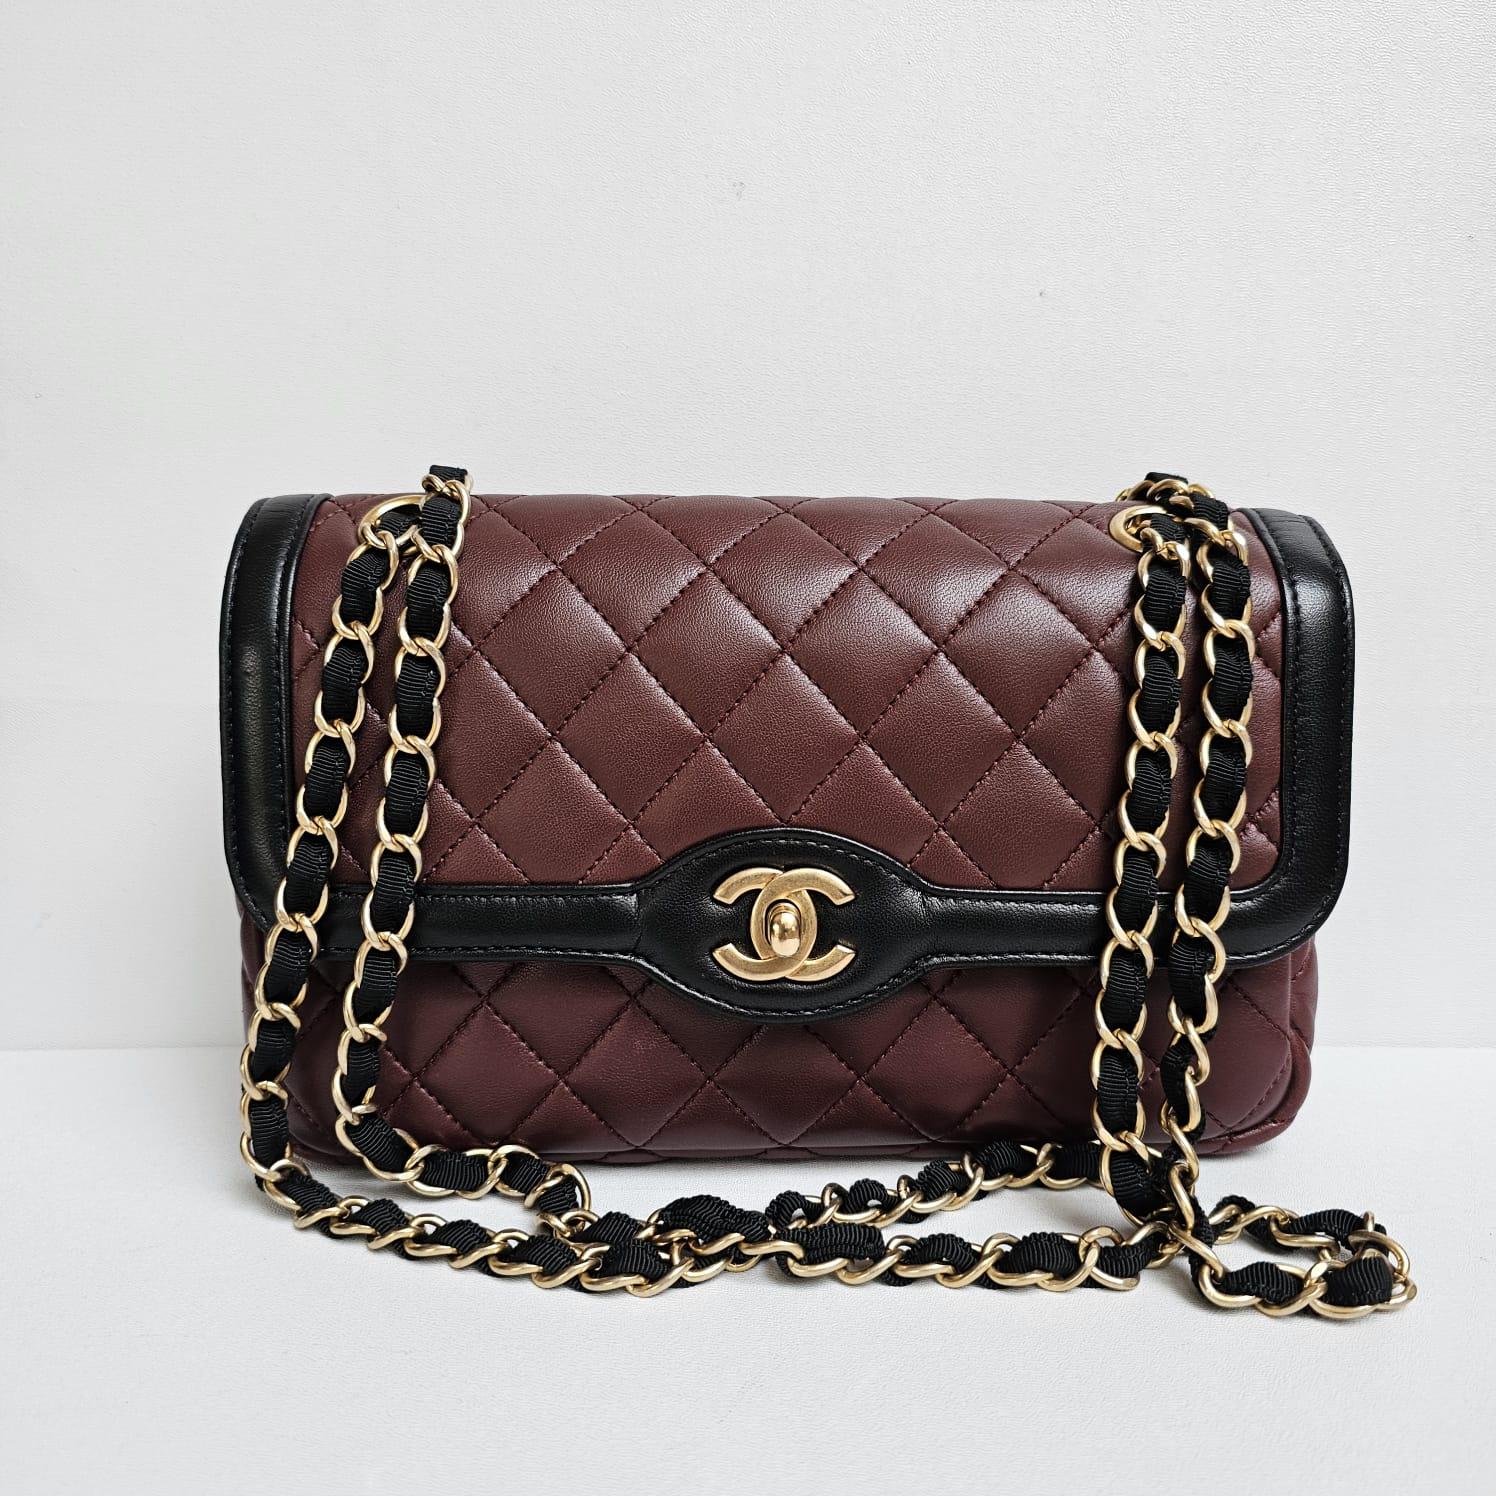 Chanel Small Two Tone Burgundy Black Lambskin Quilted Flap Bag In Good Condition For Sale In Jakarta, Daerah Khusus Ibukota Jakarta